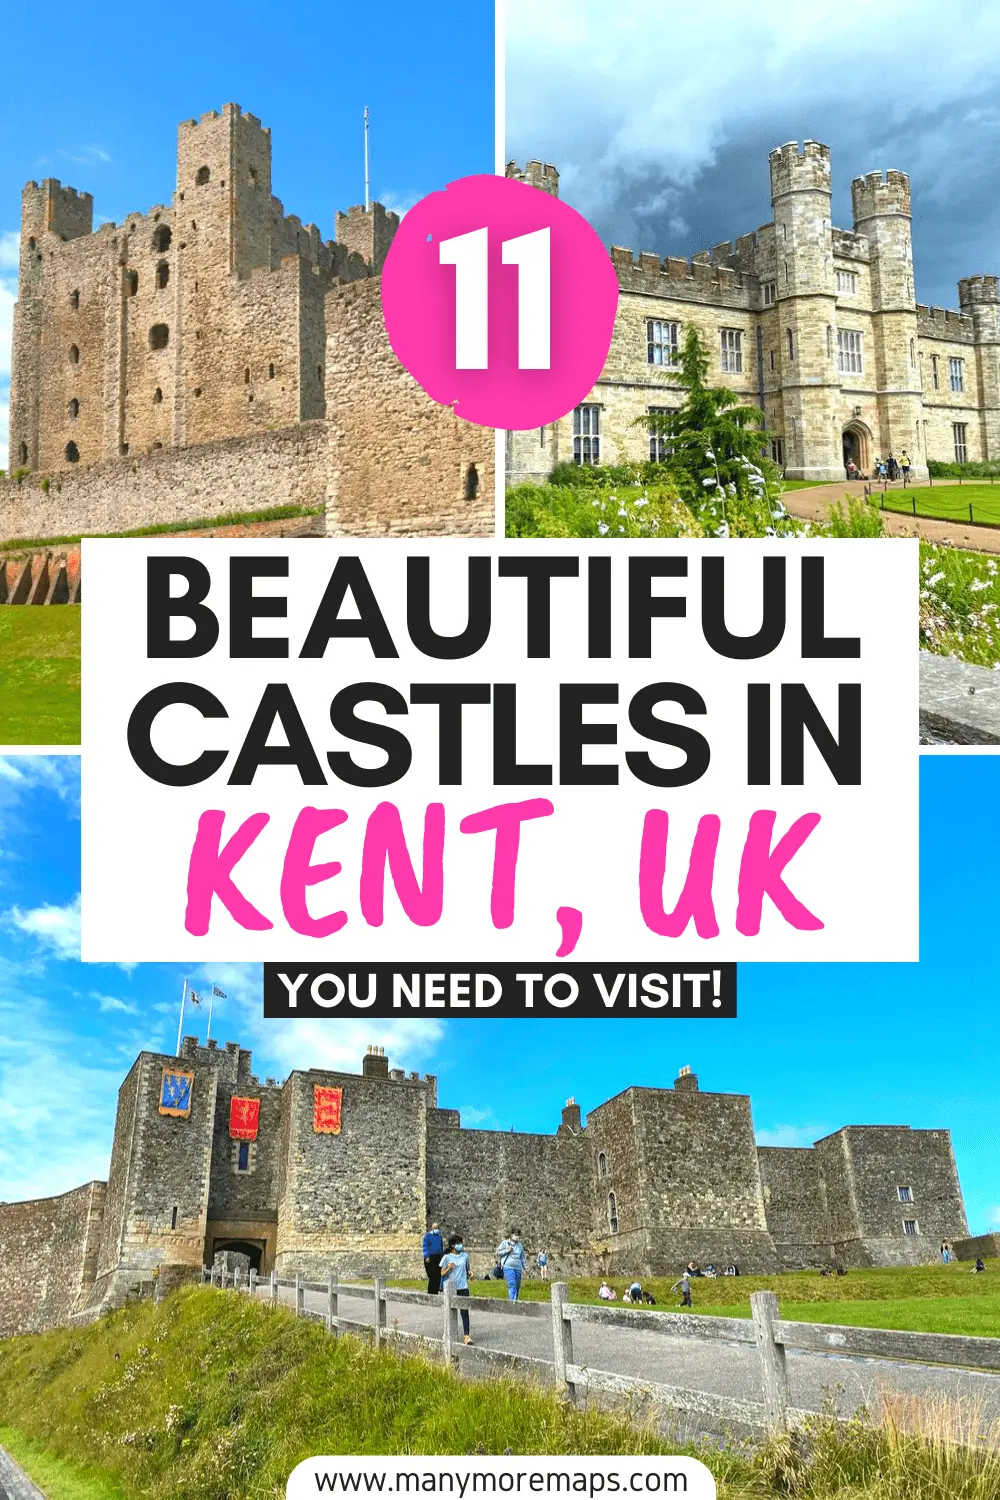 Kent is a beautiful area in England that's full of incredible castles - and they're super easy to visit on day trips from London by public transport! This post covers the very best castles and most beautiful places to visit in Kent to add to your England bucket list. Staycation ideas, places to visit in the UK, England travel tips, things to do in England, history day trips from London by train, Tudor England, Leeds Castle, Hever Castle, Dover Castle, Rochester Castle, Sissinghurst Castle